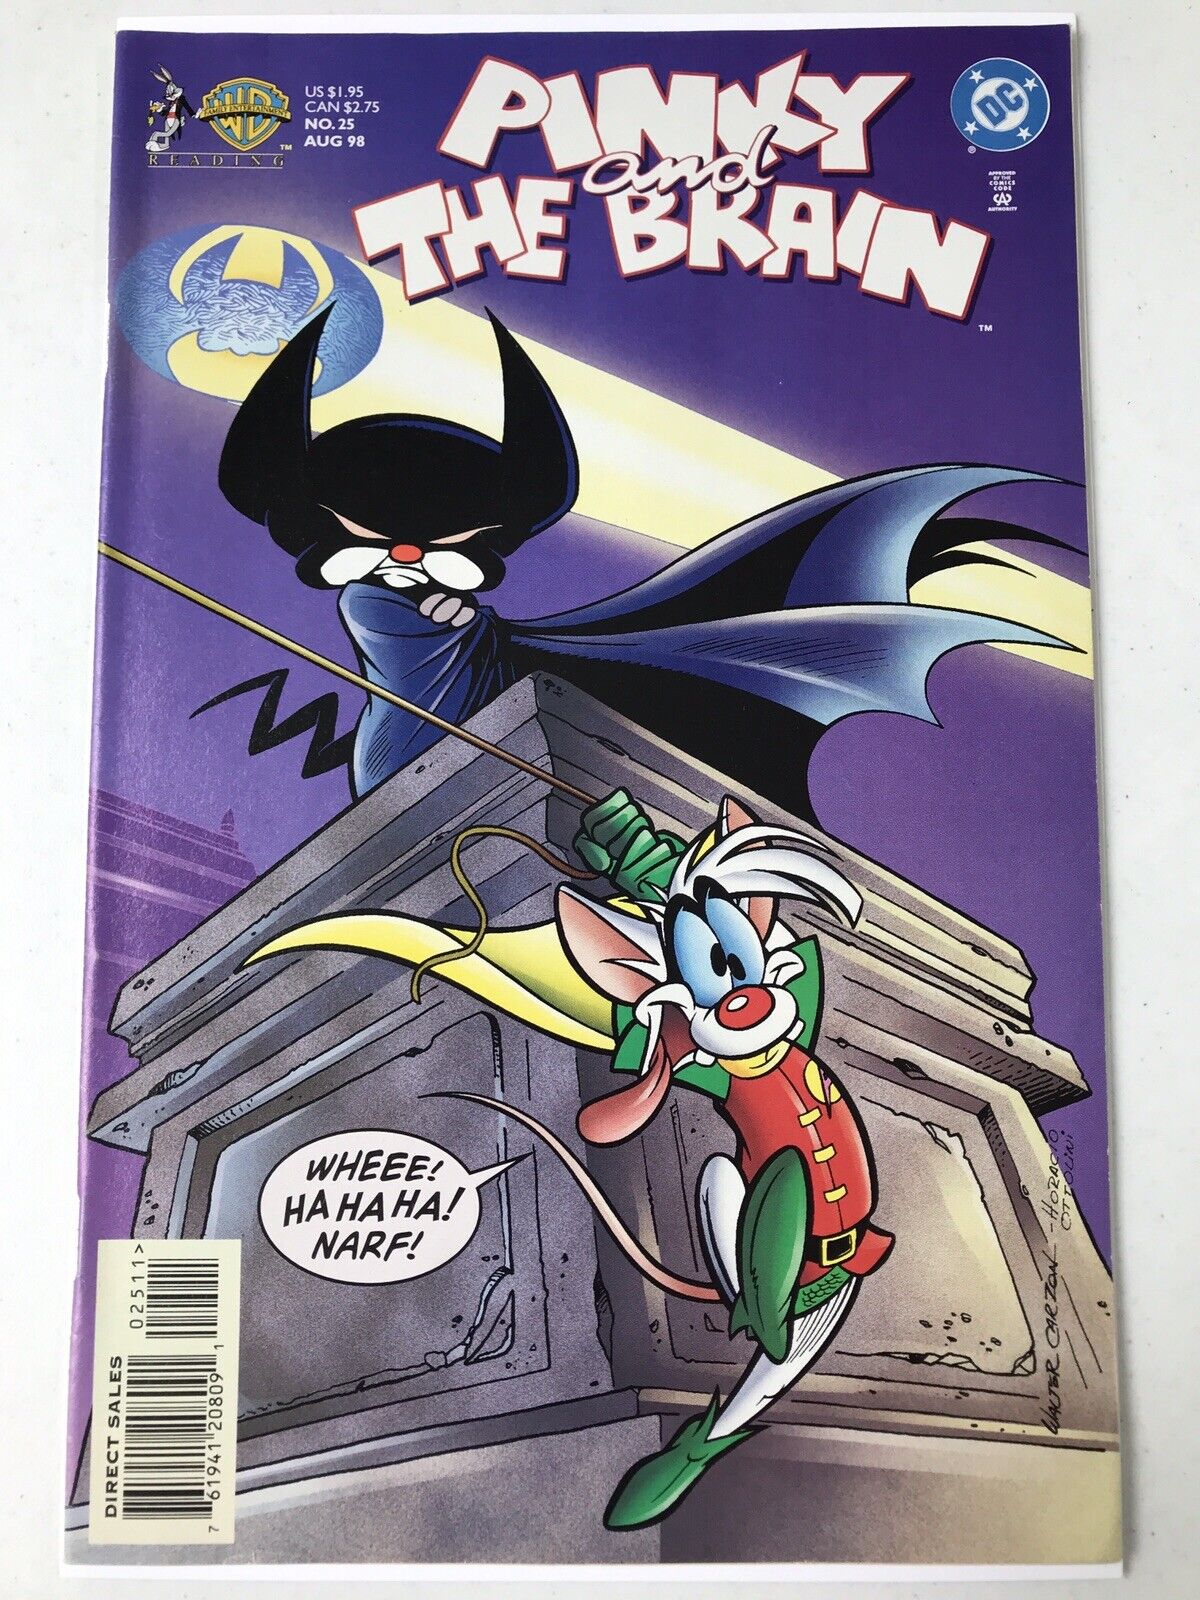 Pinky and the Brain 25, DC 1998, Batman and Robin